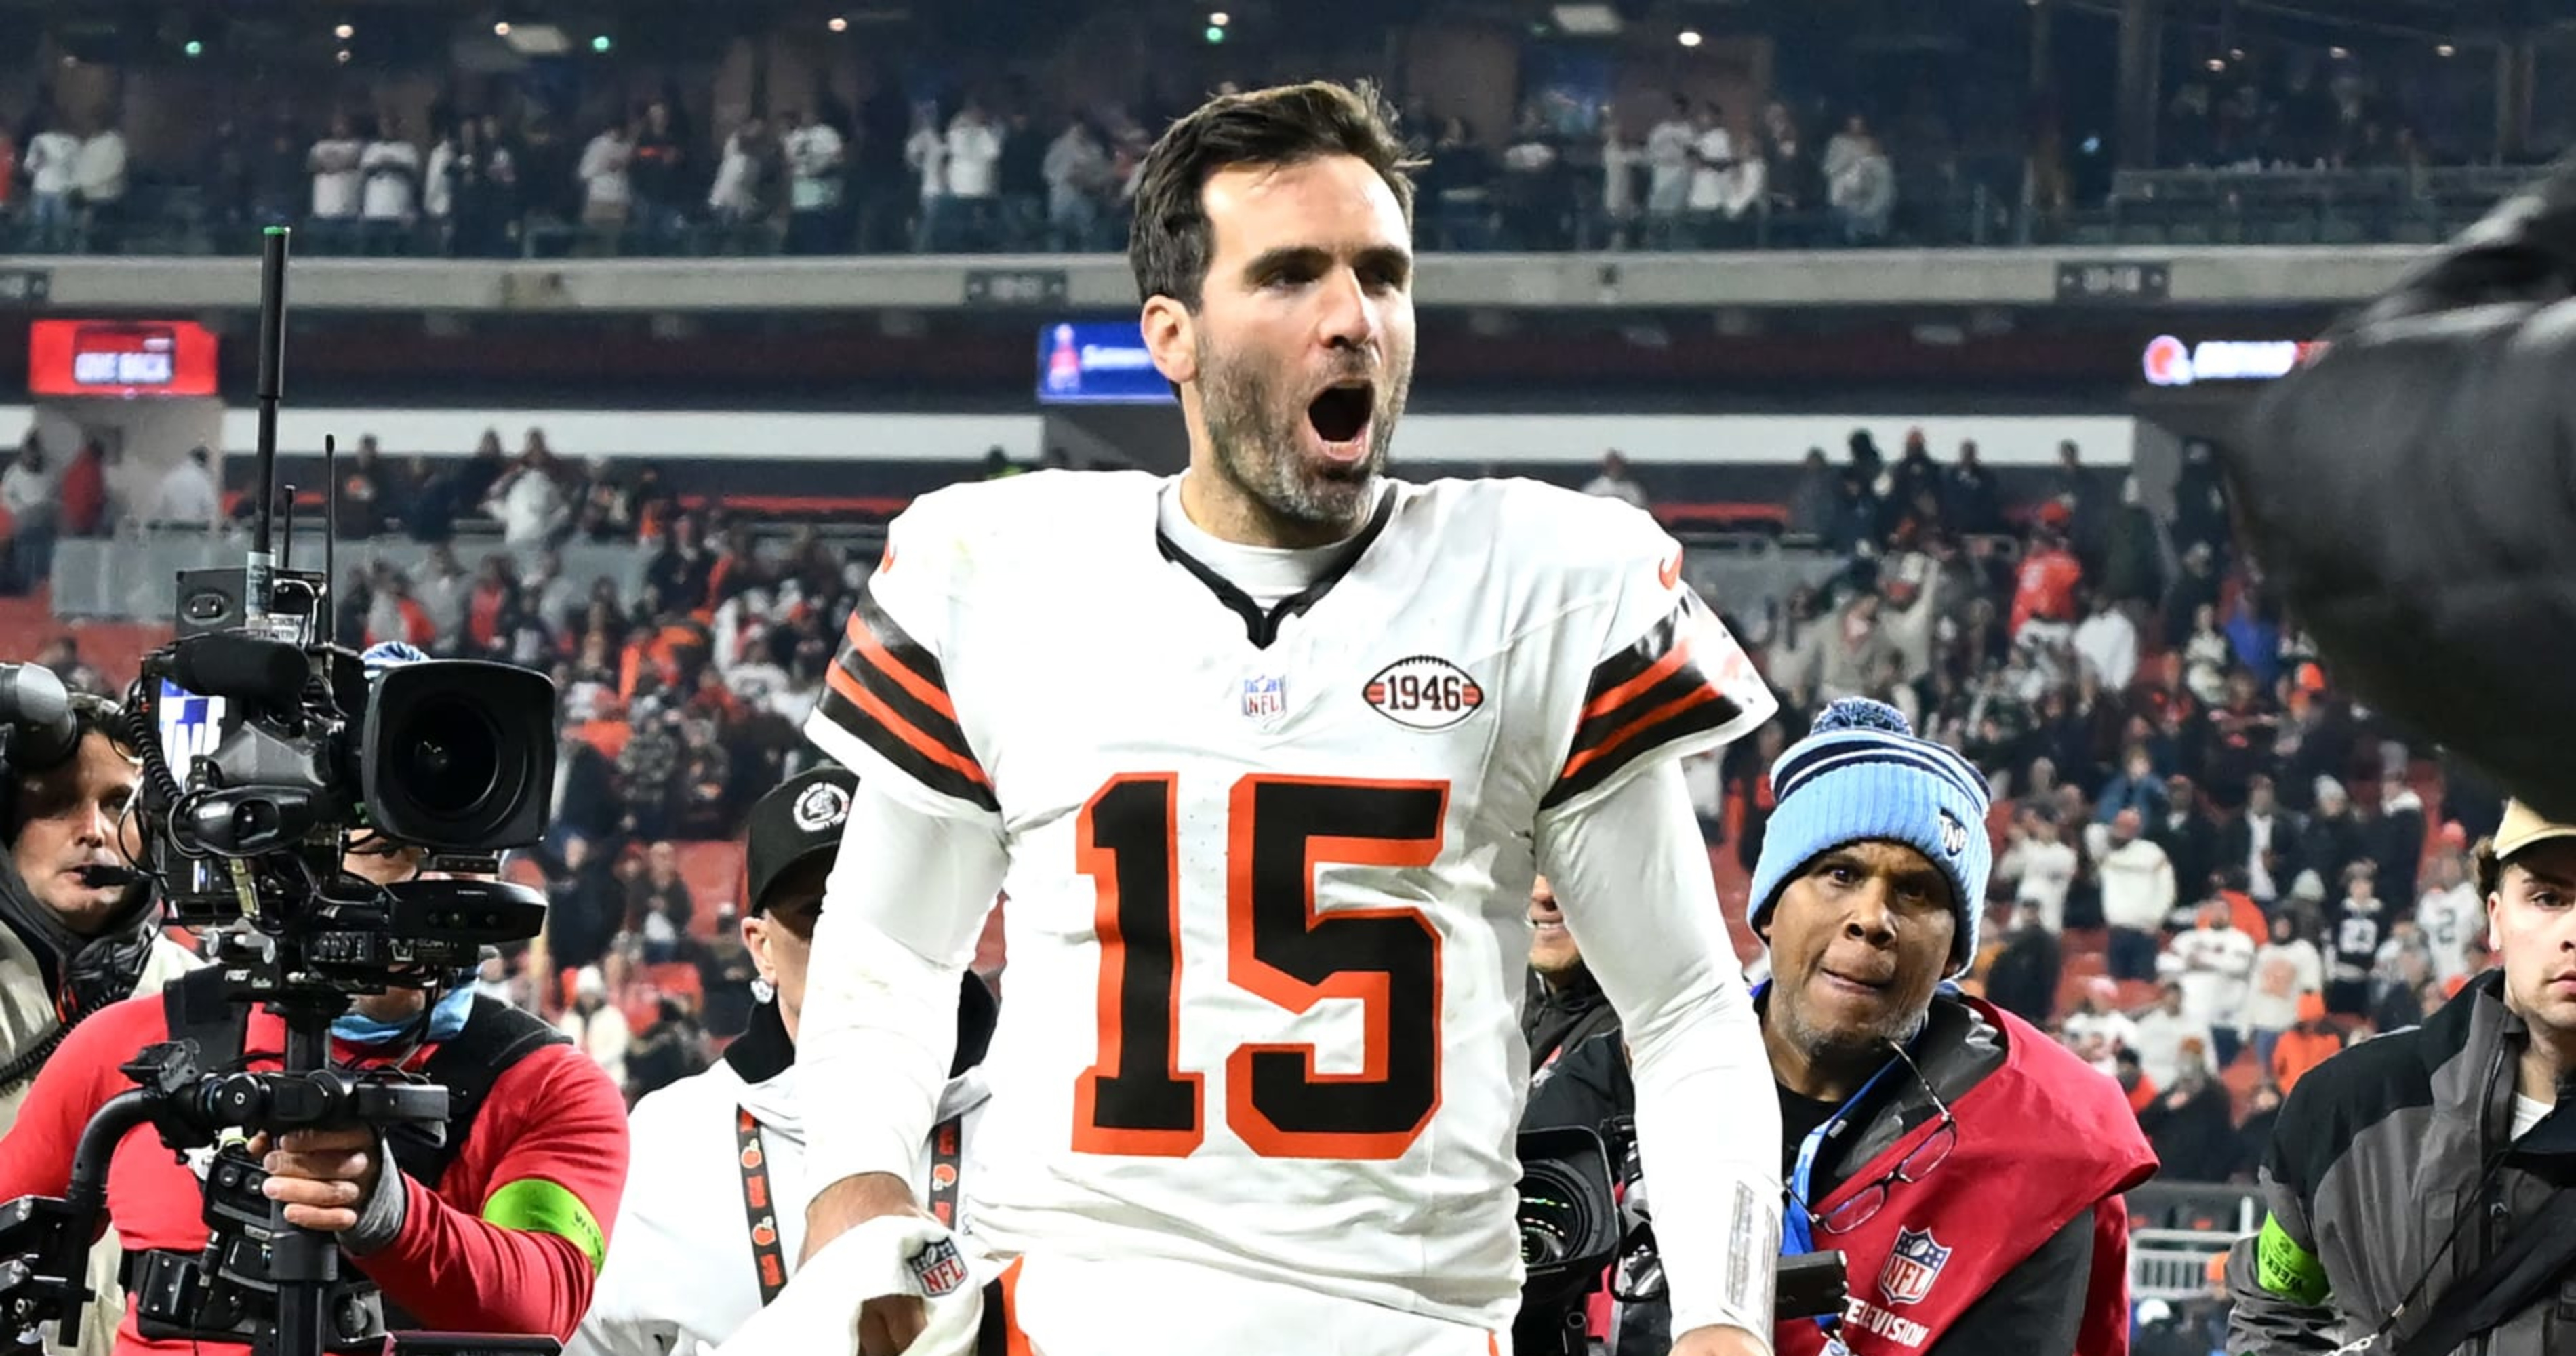 Browns' Joe Flacco Has Earned 300K in Contract Bonuses with 4 Straight